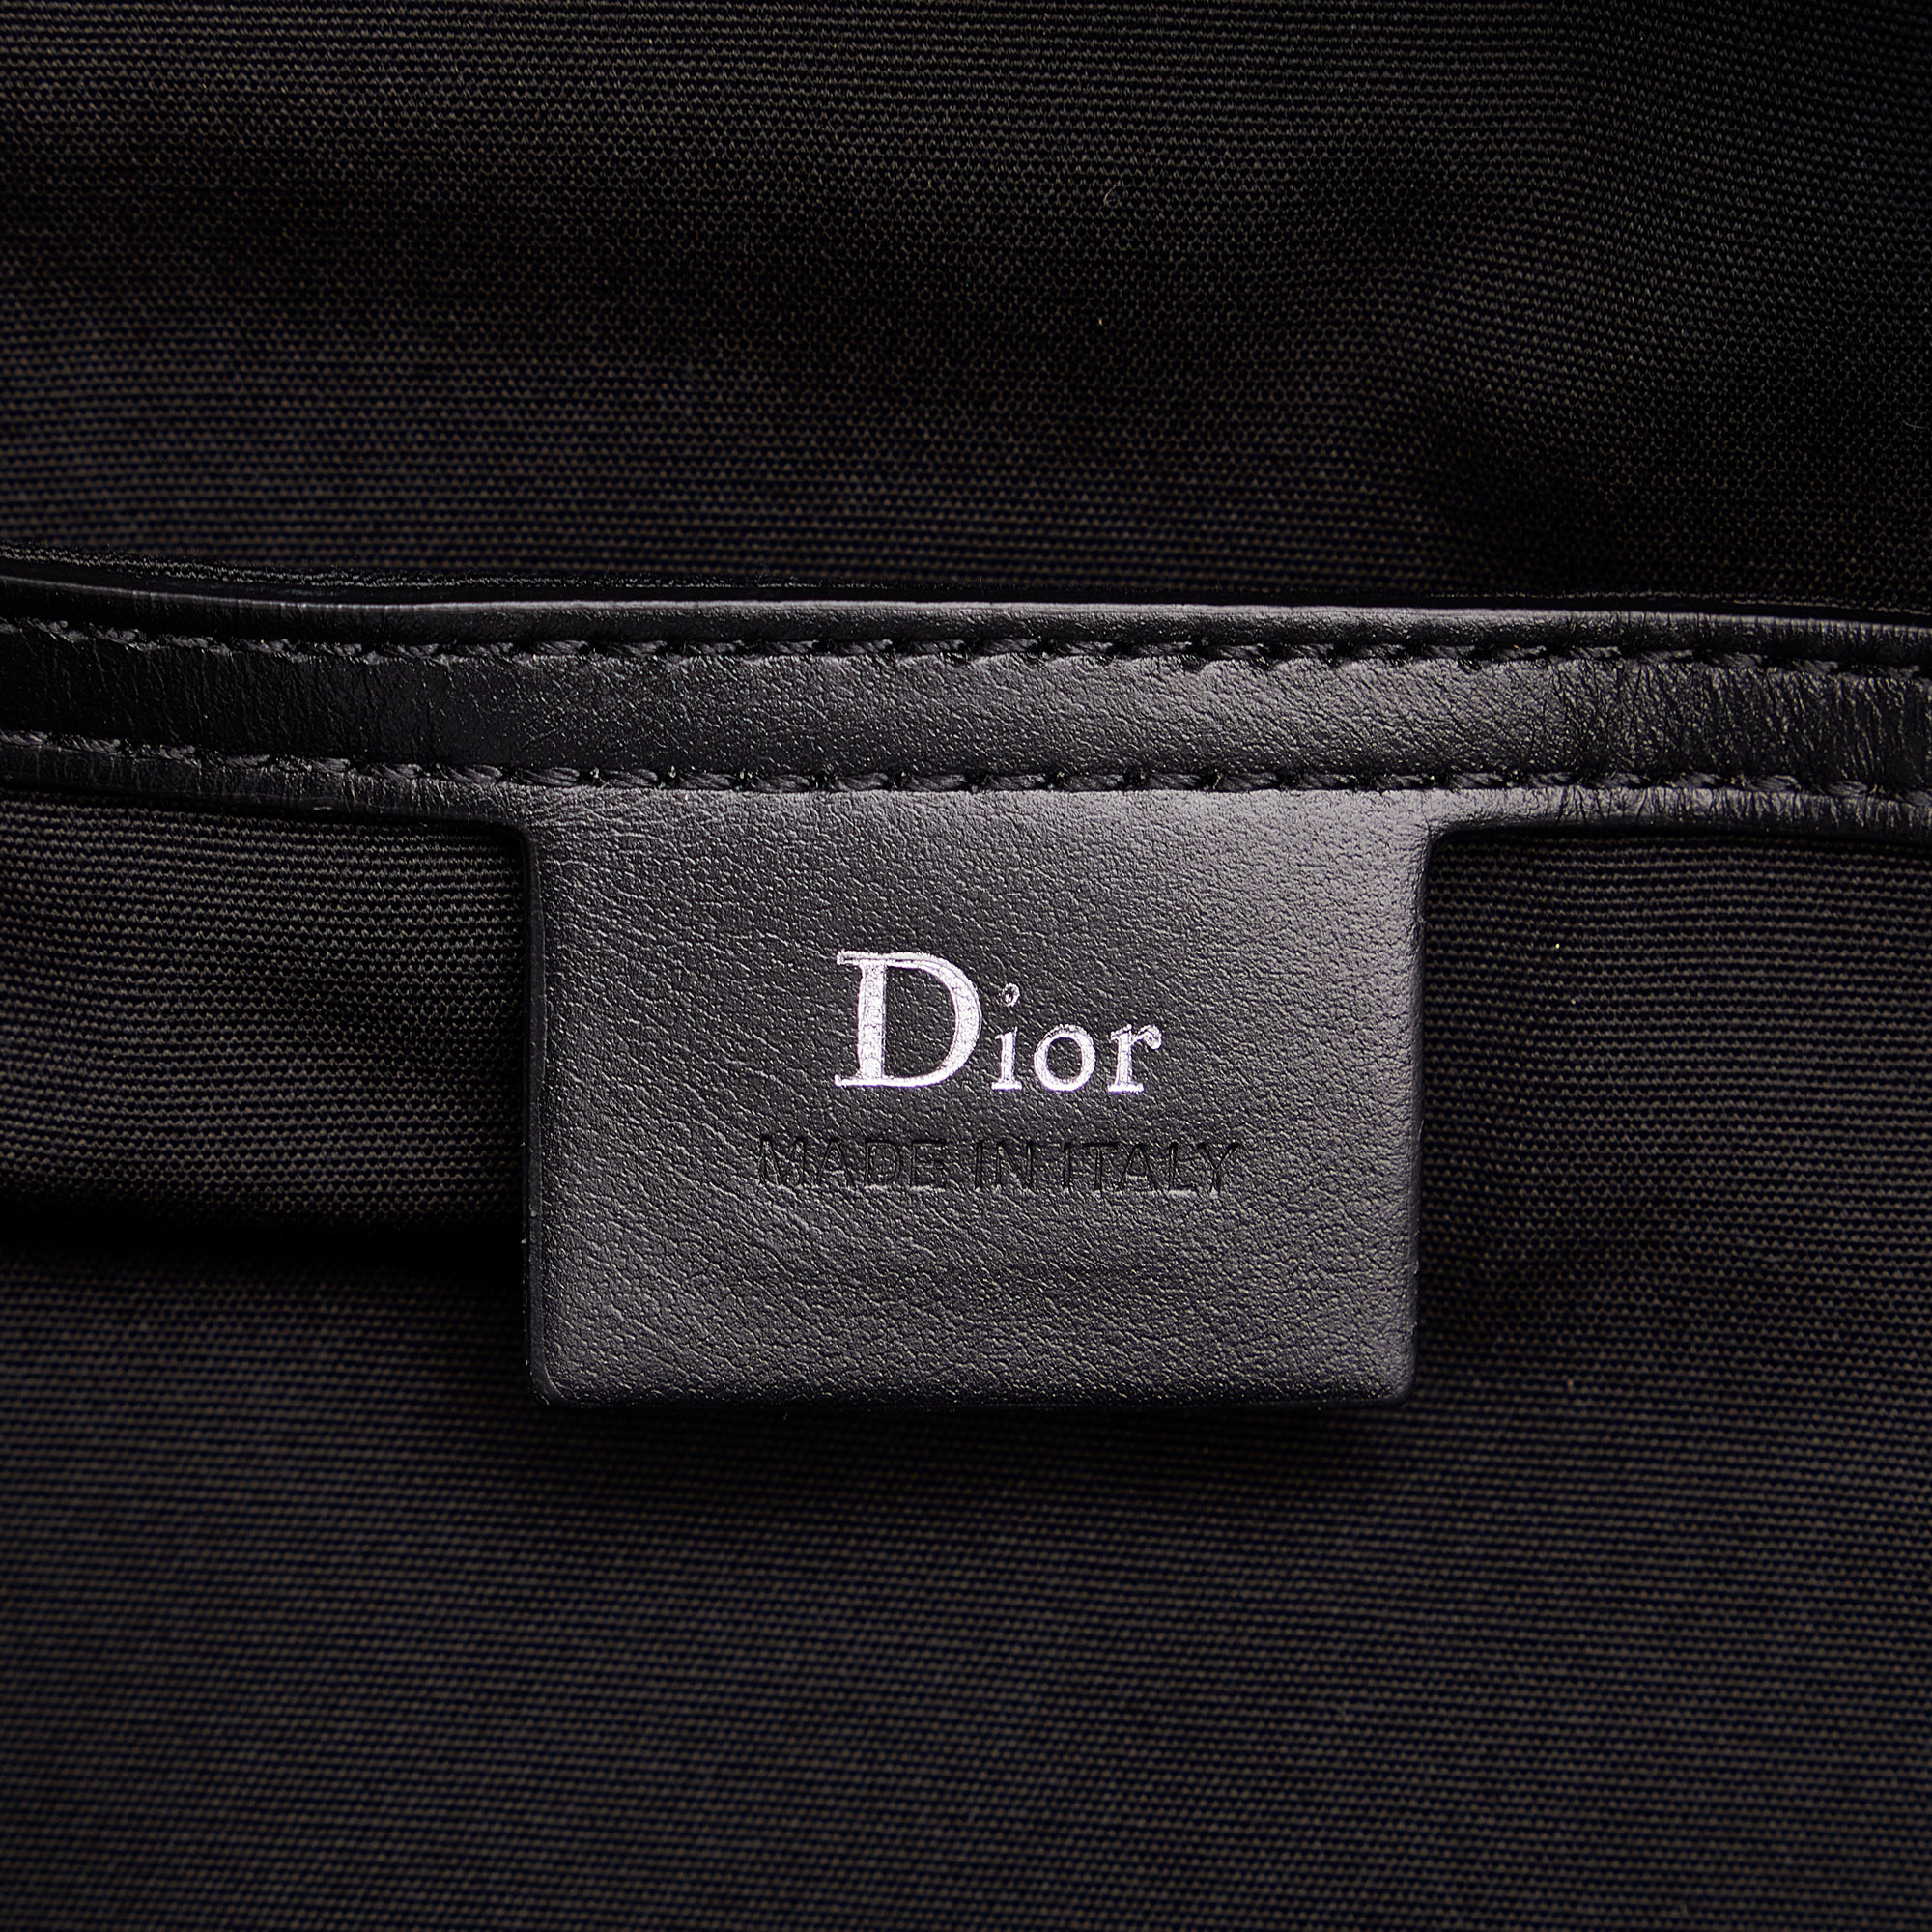 Dior Black Patch Nylon Backpack